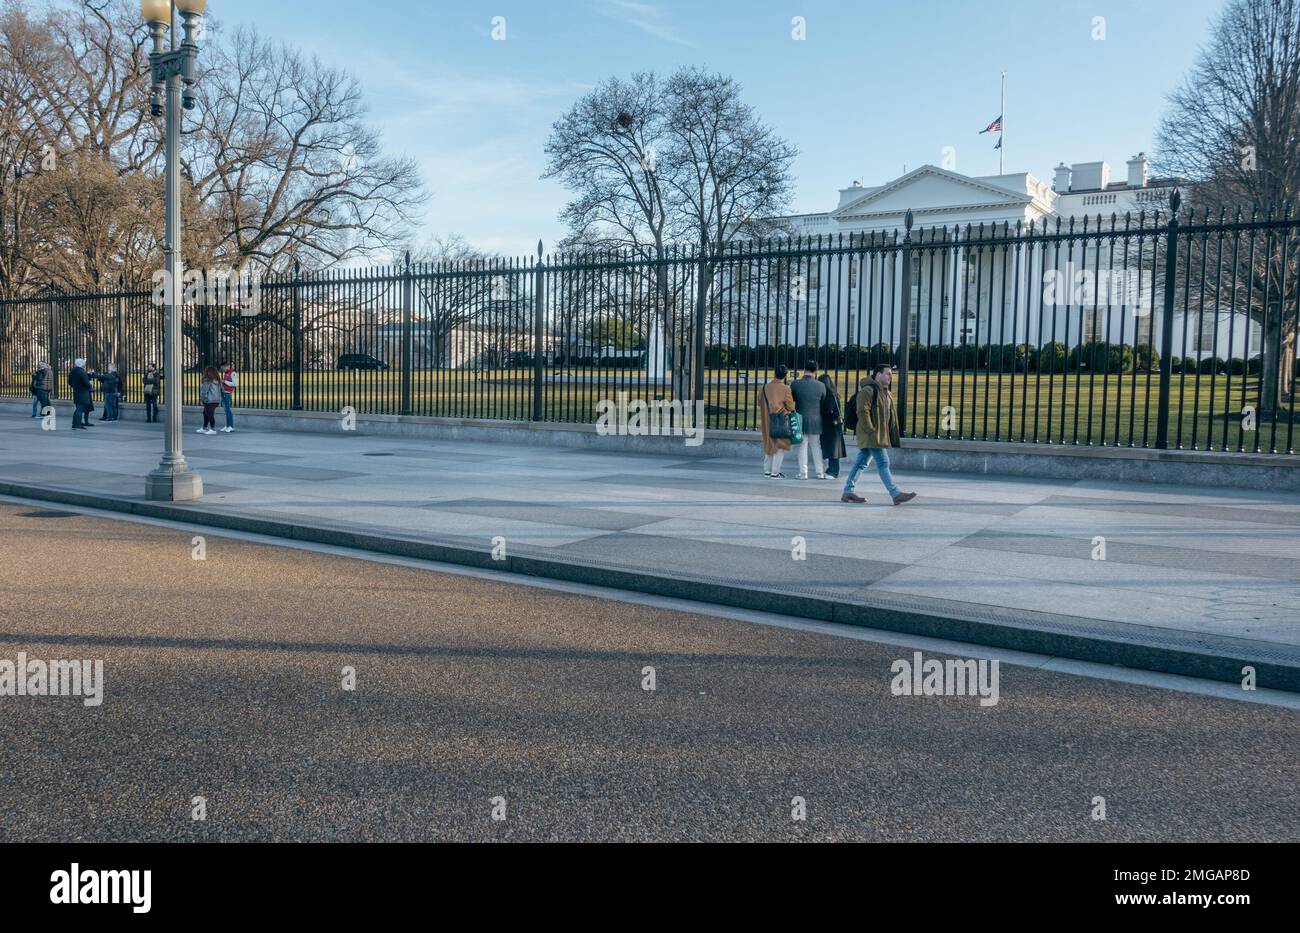 Washington, DC. Jan. 2023. The new 13-foot fence which replaced the scalable shorter 6' 6' fence around the White House grounds, Several security breaches had been the impetus for the taller fence. Stock Photo